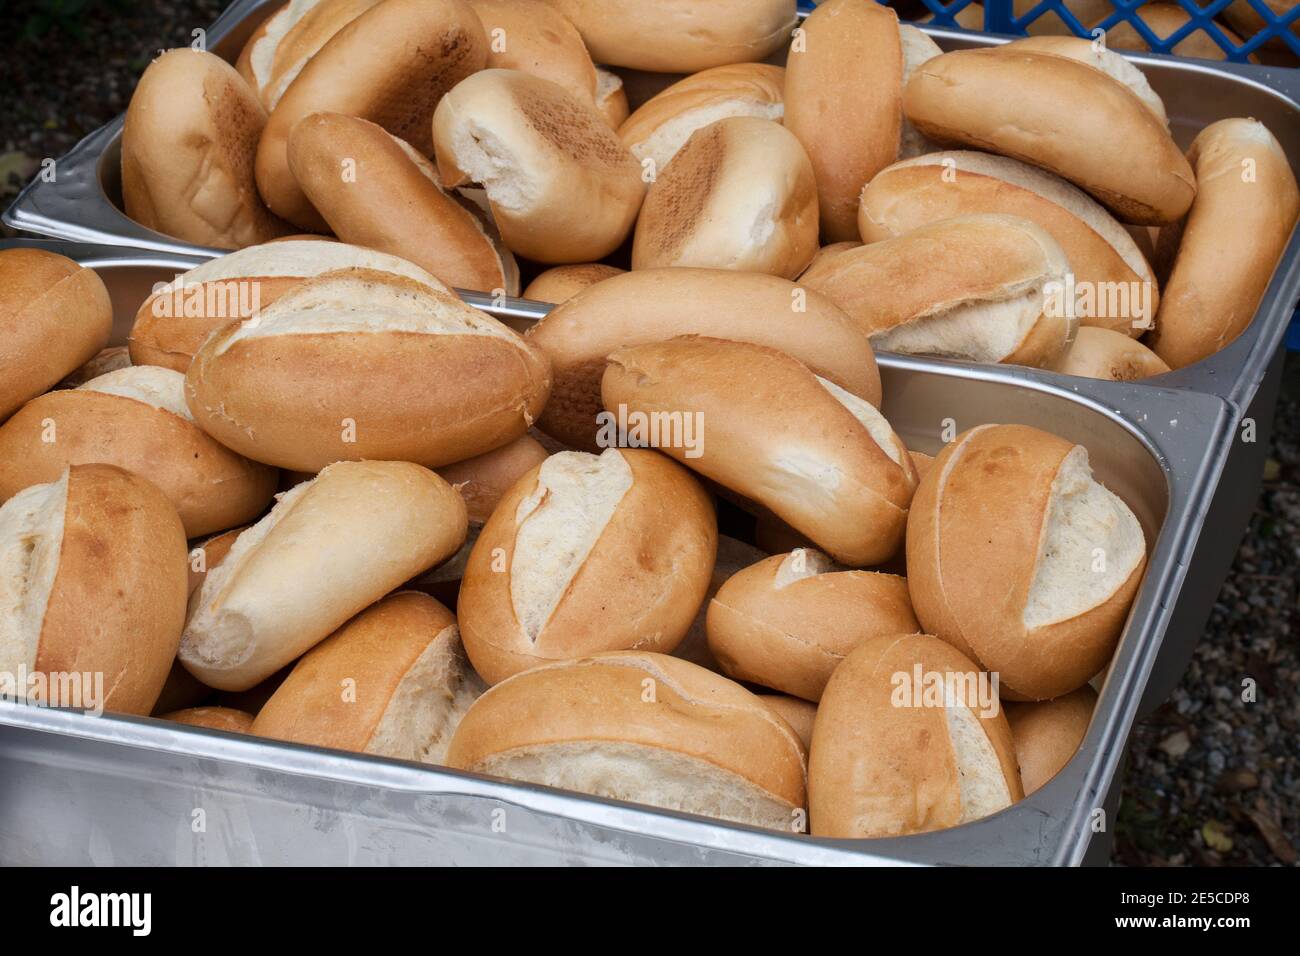 Many crusty bread rolls in a metal container for sale Stock Photo